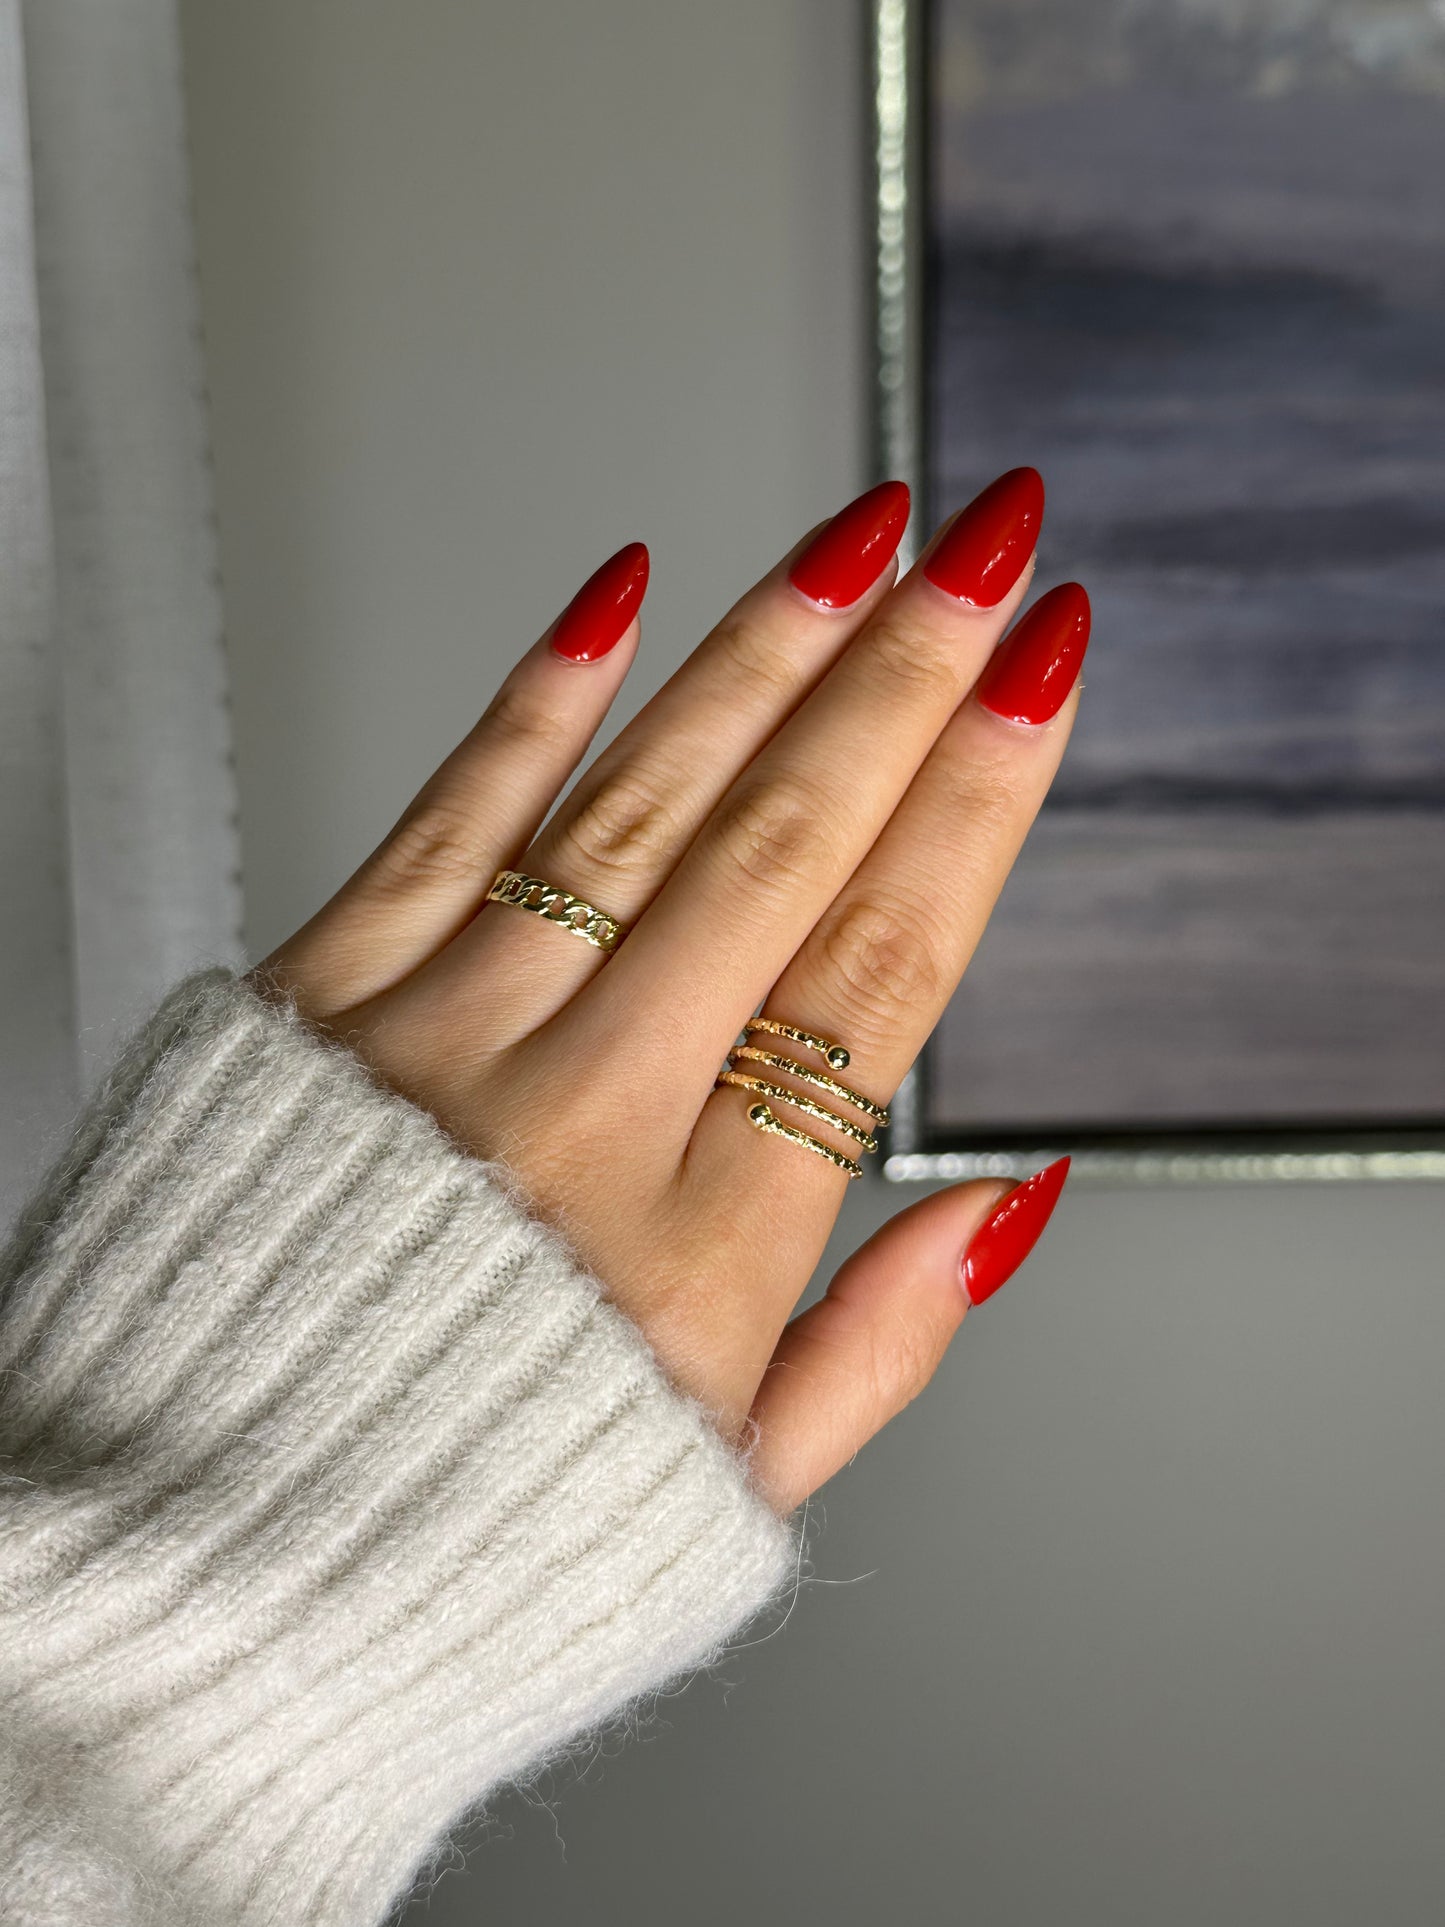 Classic red nails